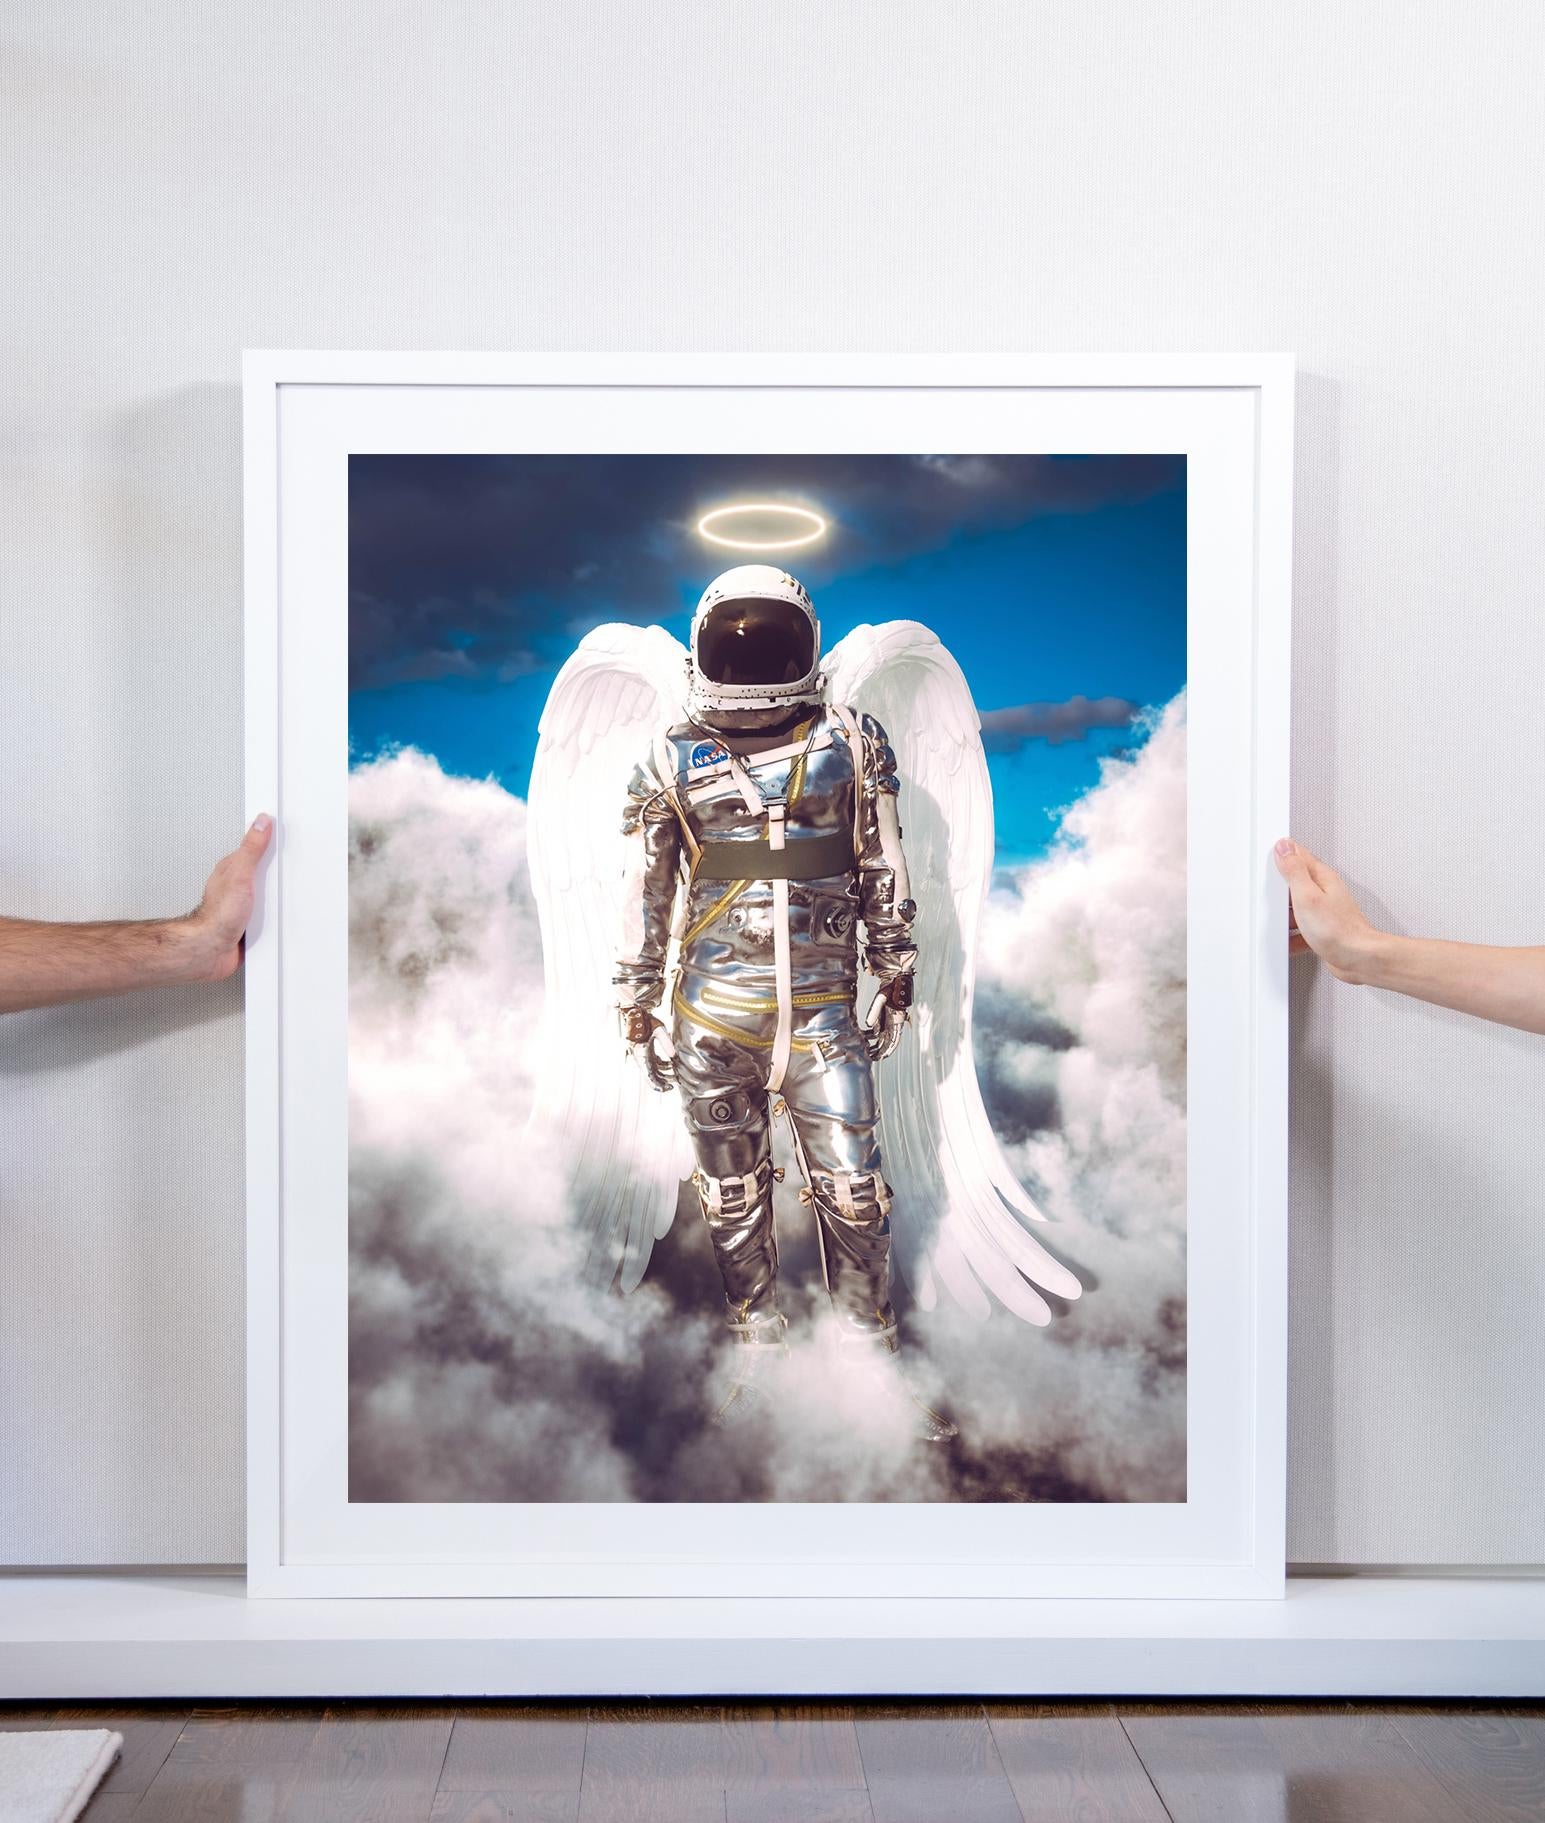 Angel Astro - Photograph by Cameron Burns